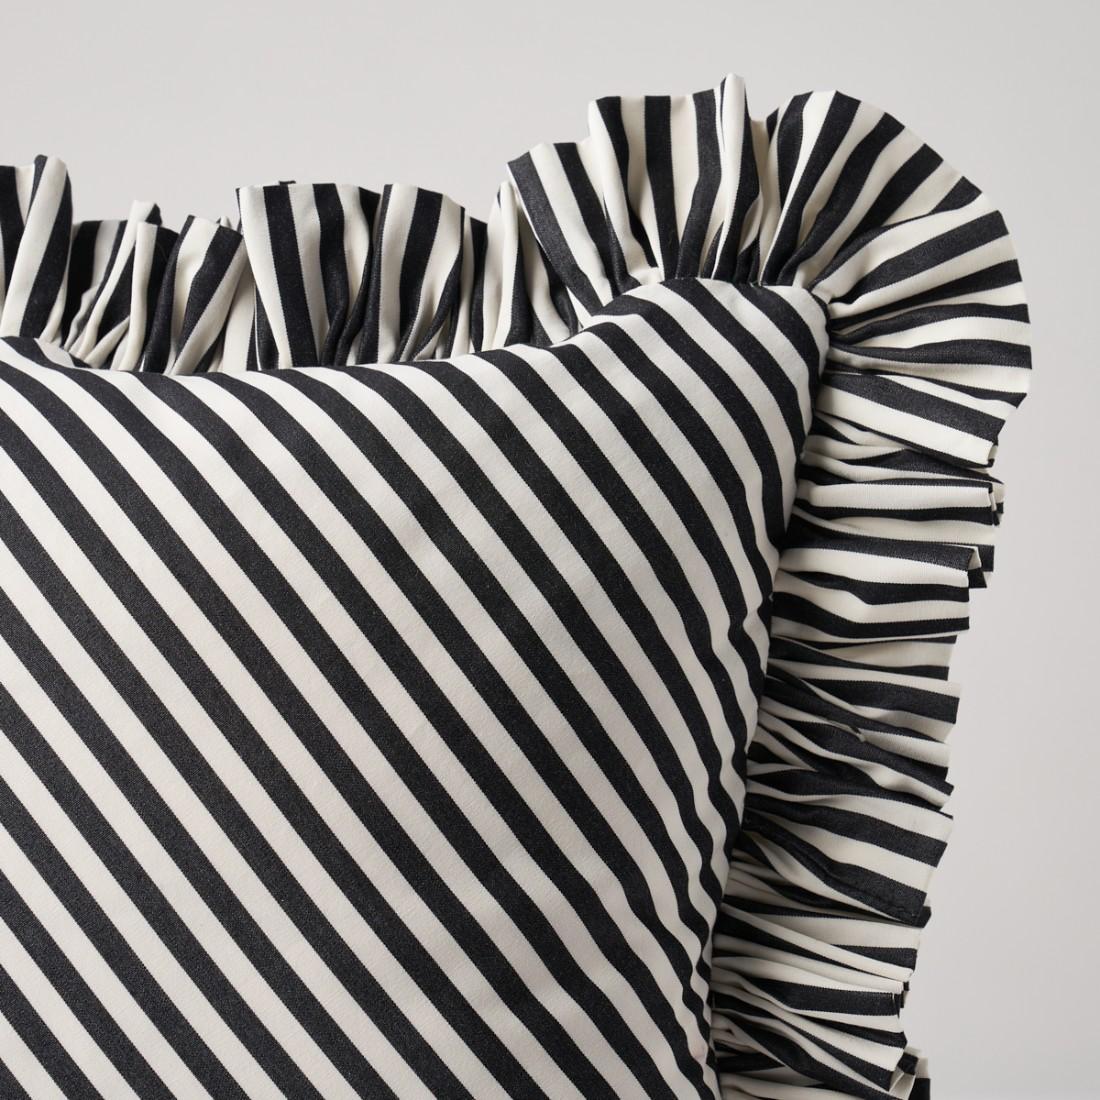 This pillow features Brigitte Stripe with a fringe finish. The perfect thin stripe, not too casual and not too dressy. Pillow includes a feather/down fill insert and hidden zipper closure.

*If out of stock, lead-time is 15-20 business days